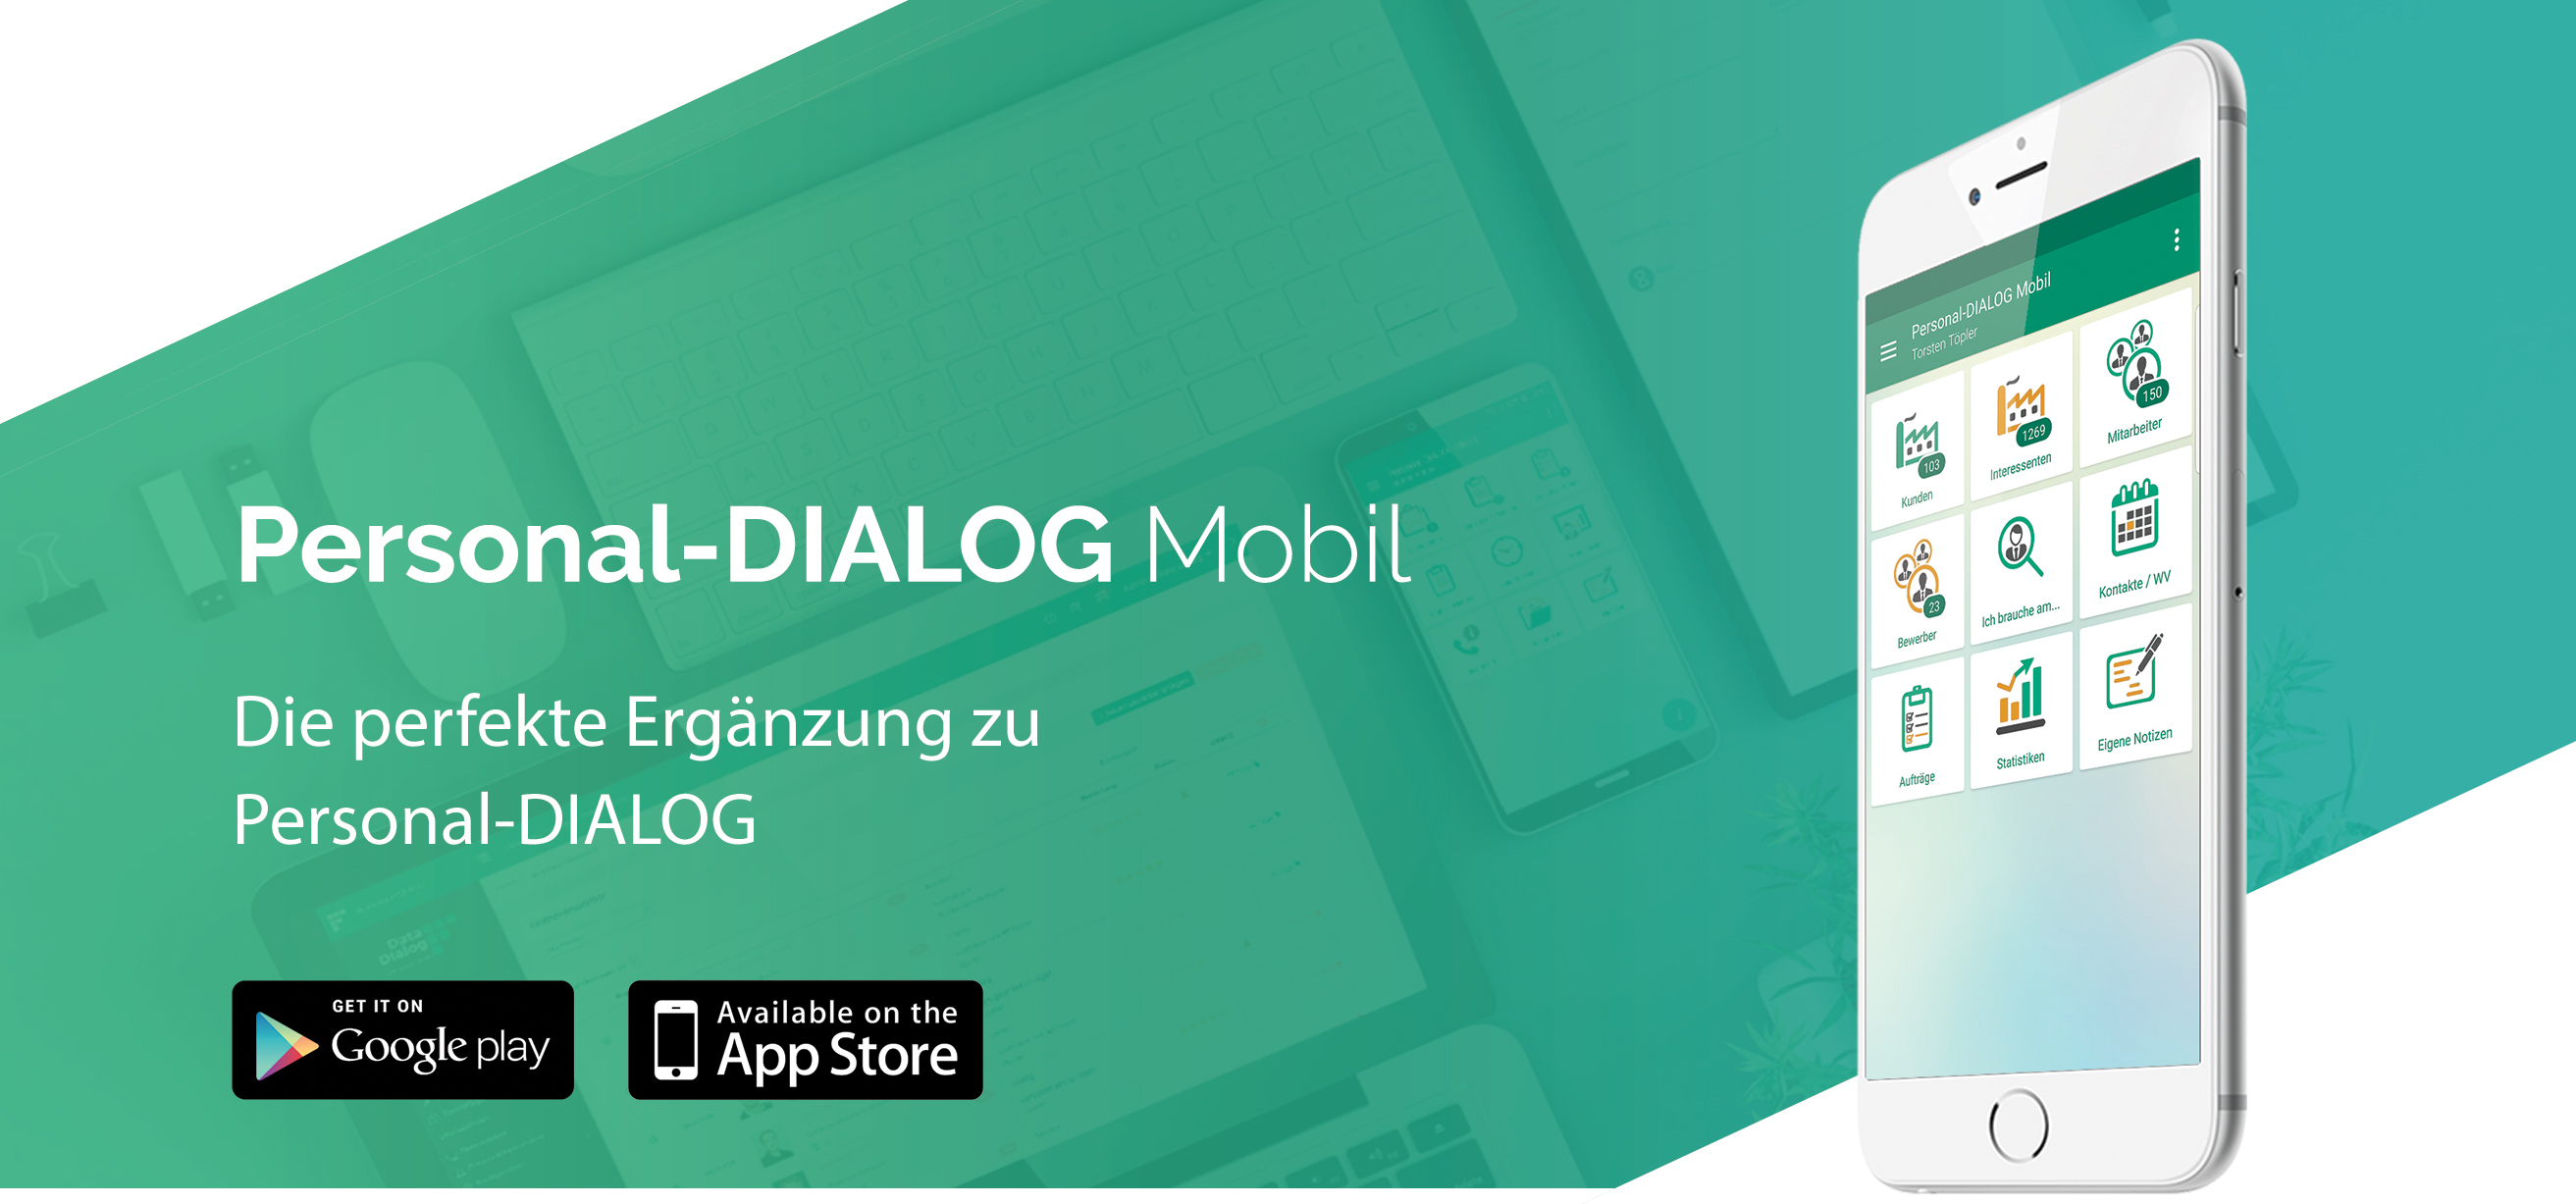 Personal-DIALOG Mobil - Funktionen